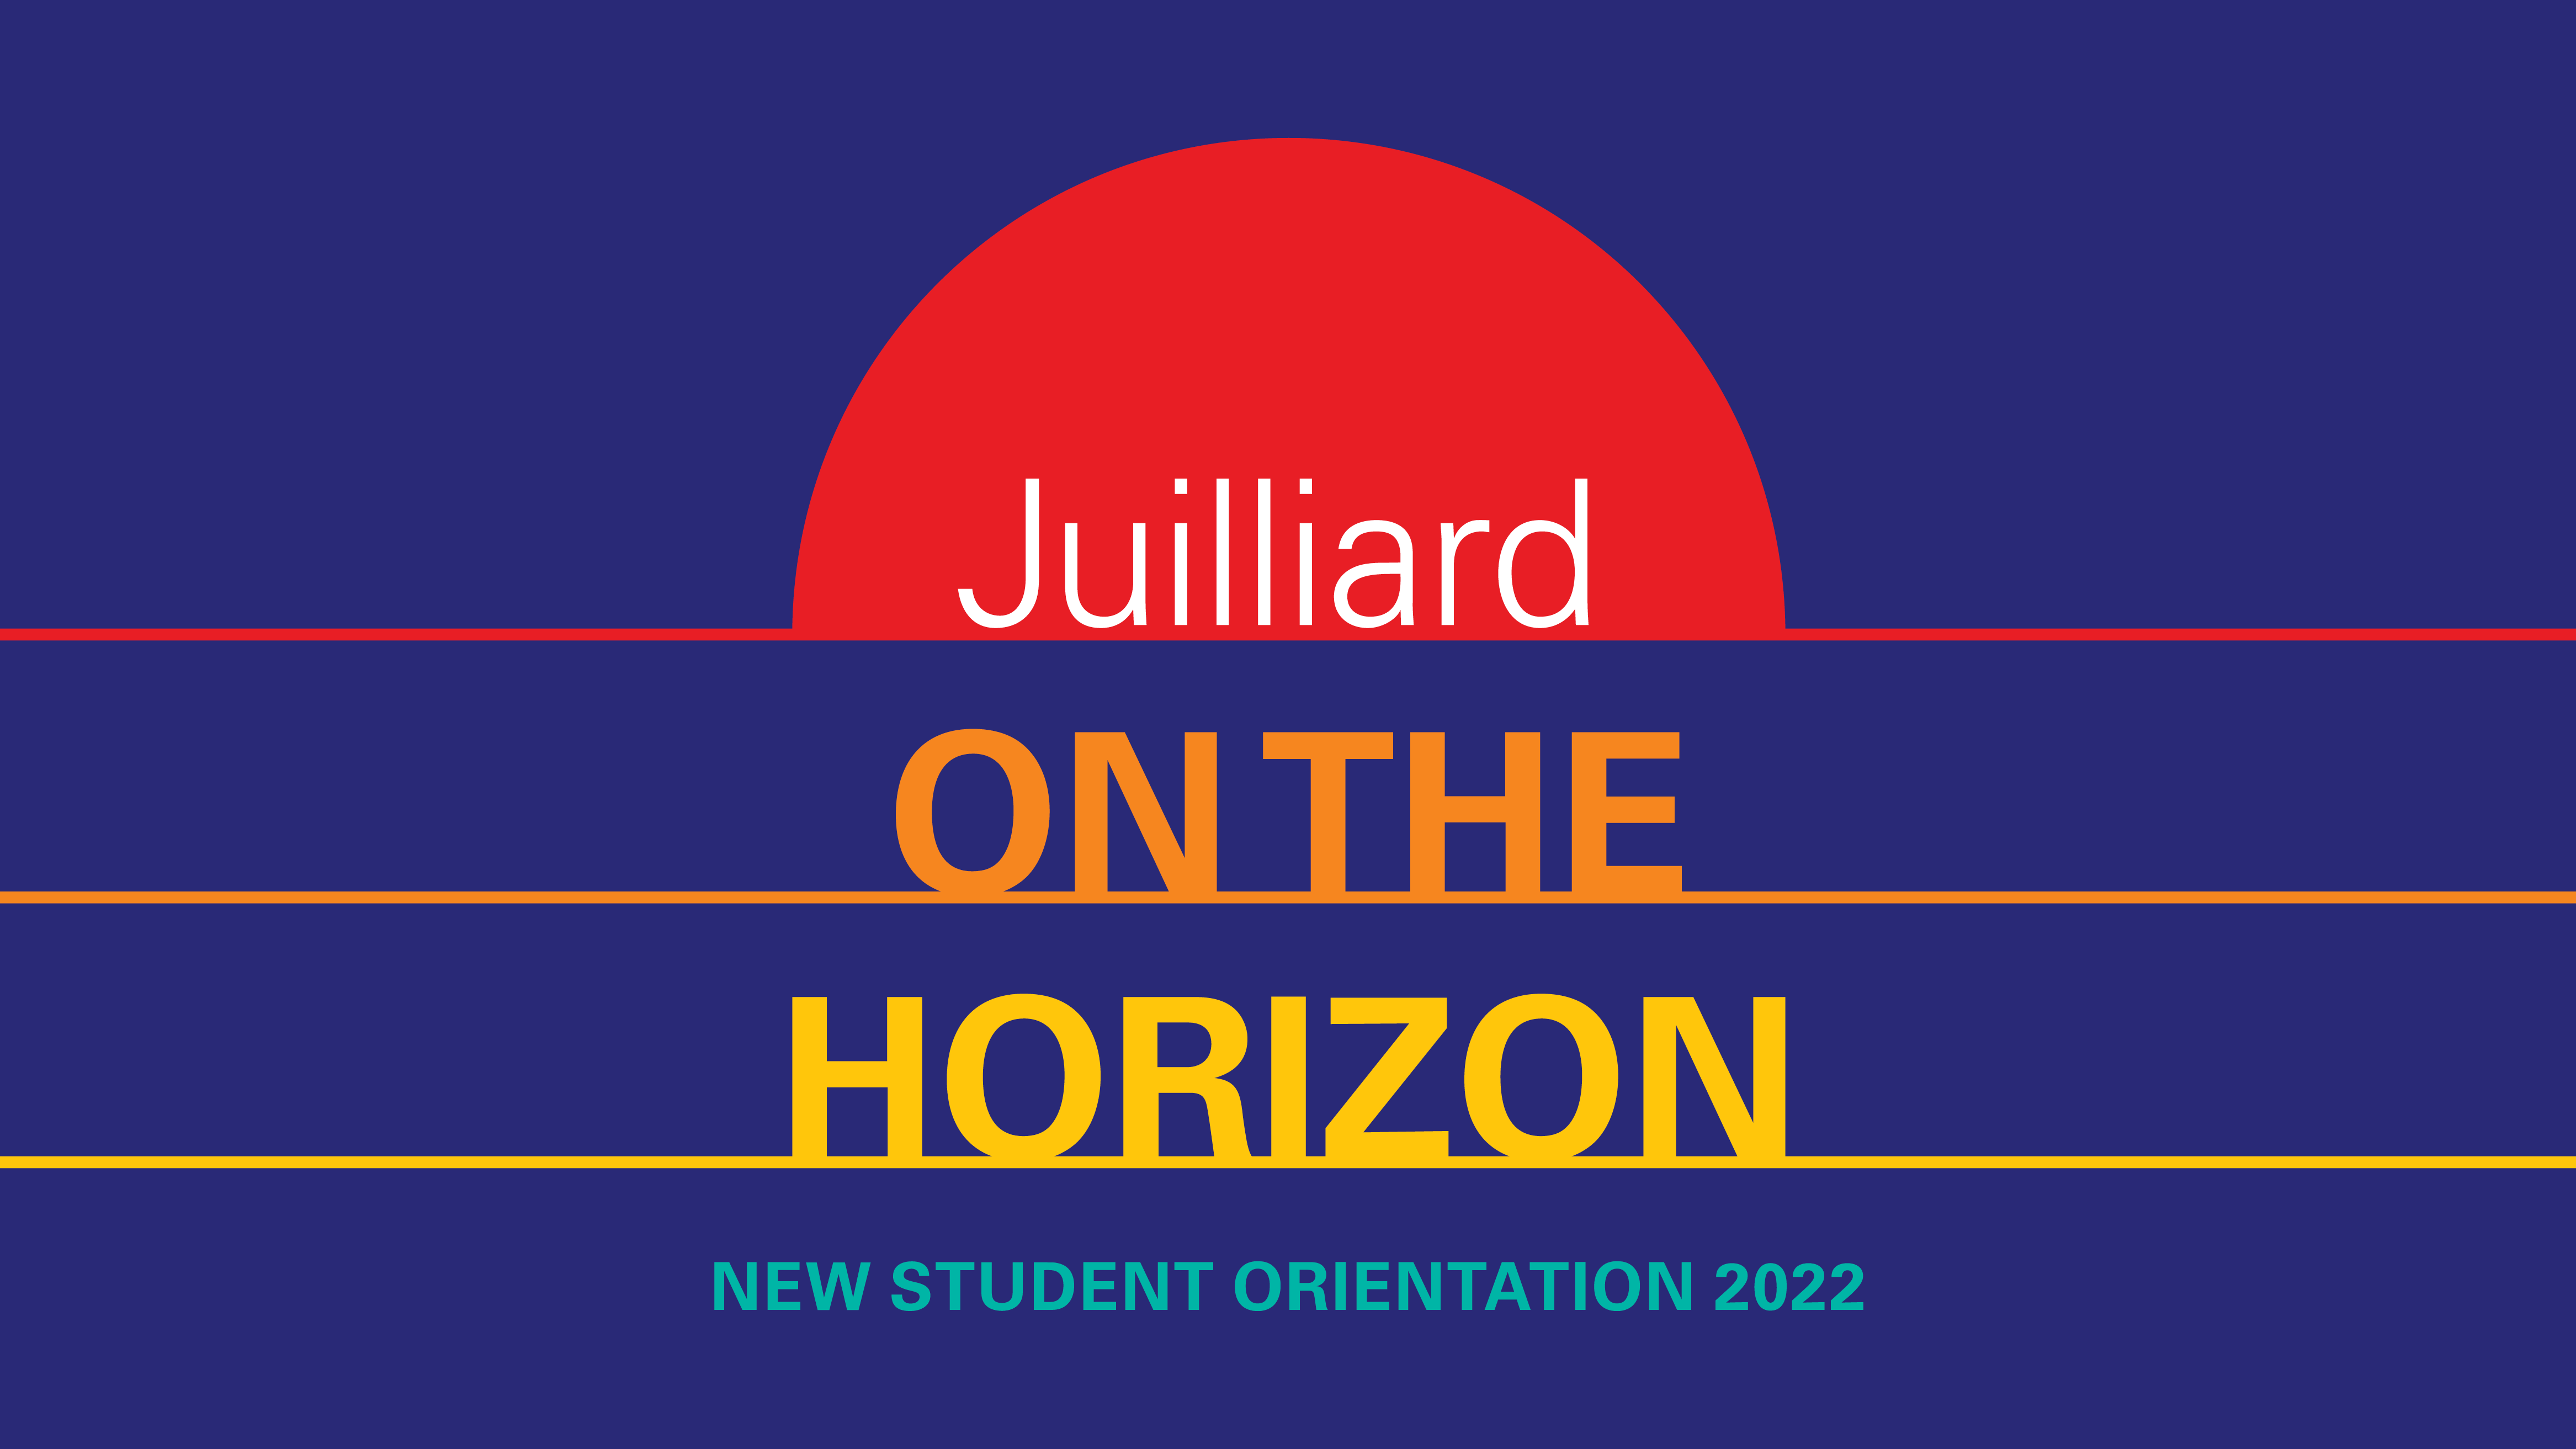 This image has navy blue background. The top half of a red circle sits on a red line. Inside the red semi-circle is the word Juilliard in white letters. Below the red line are the words ON THE in orange on an orange line. Below the orange line is the word HORIZON in yellow on a yellow line. Below the yellow line in a smaller size font are the words New Student Orientation 2022 in the color teal.